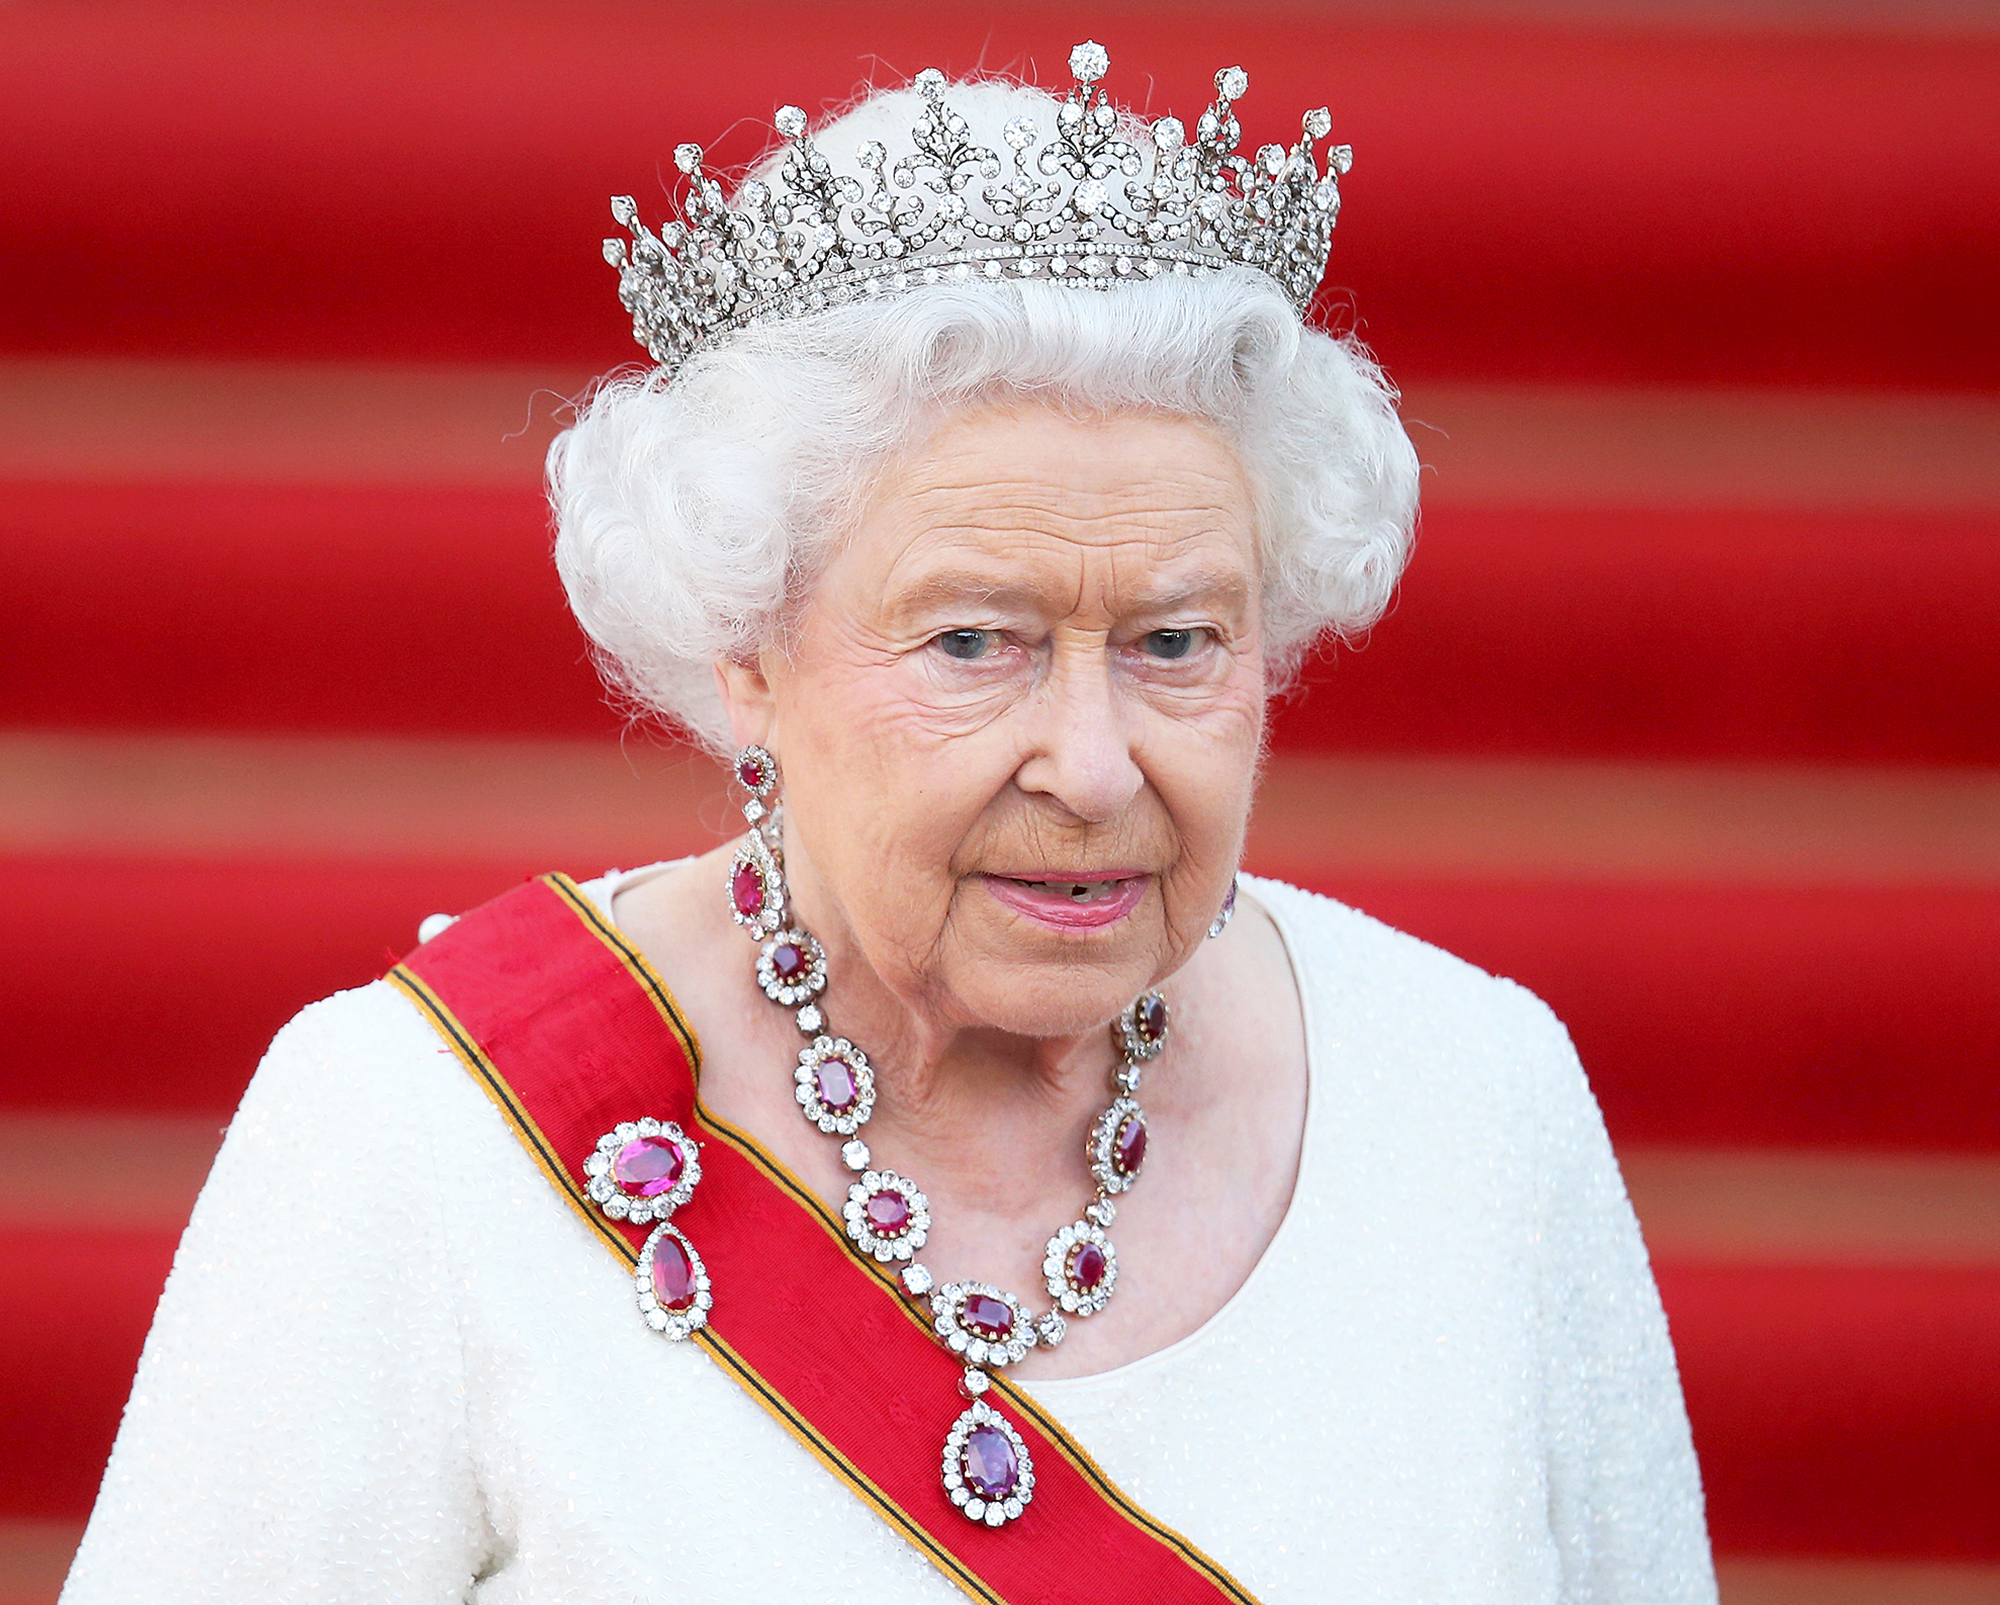 Tiara-Lending by Queen Elizabeth Is Super Complicated - My LifeStyle Max